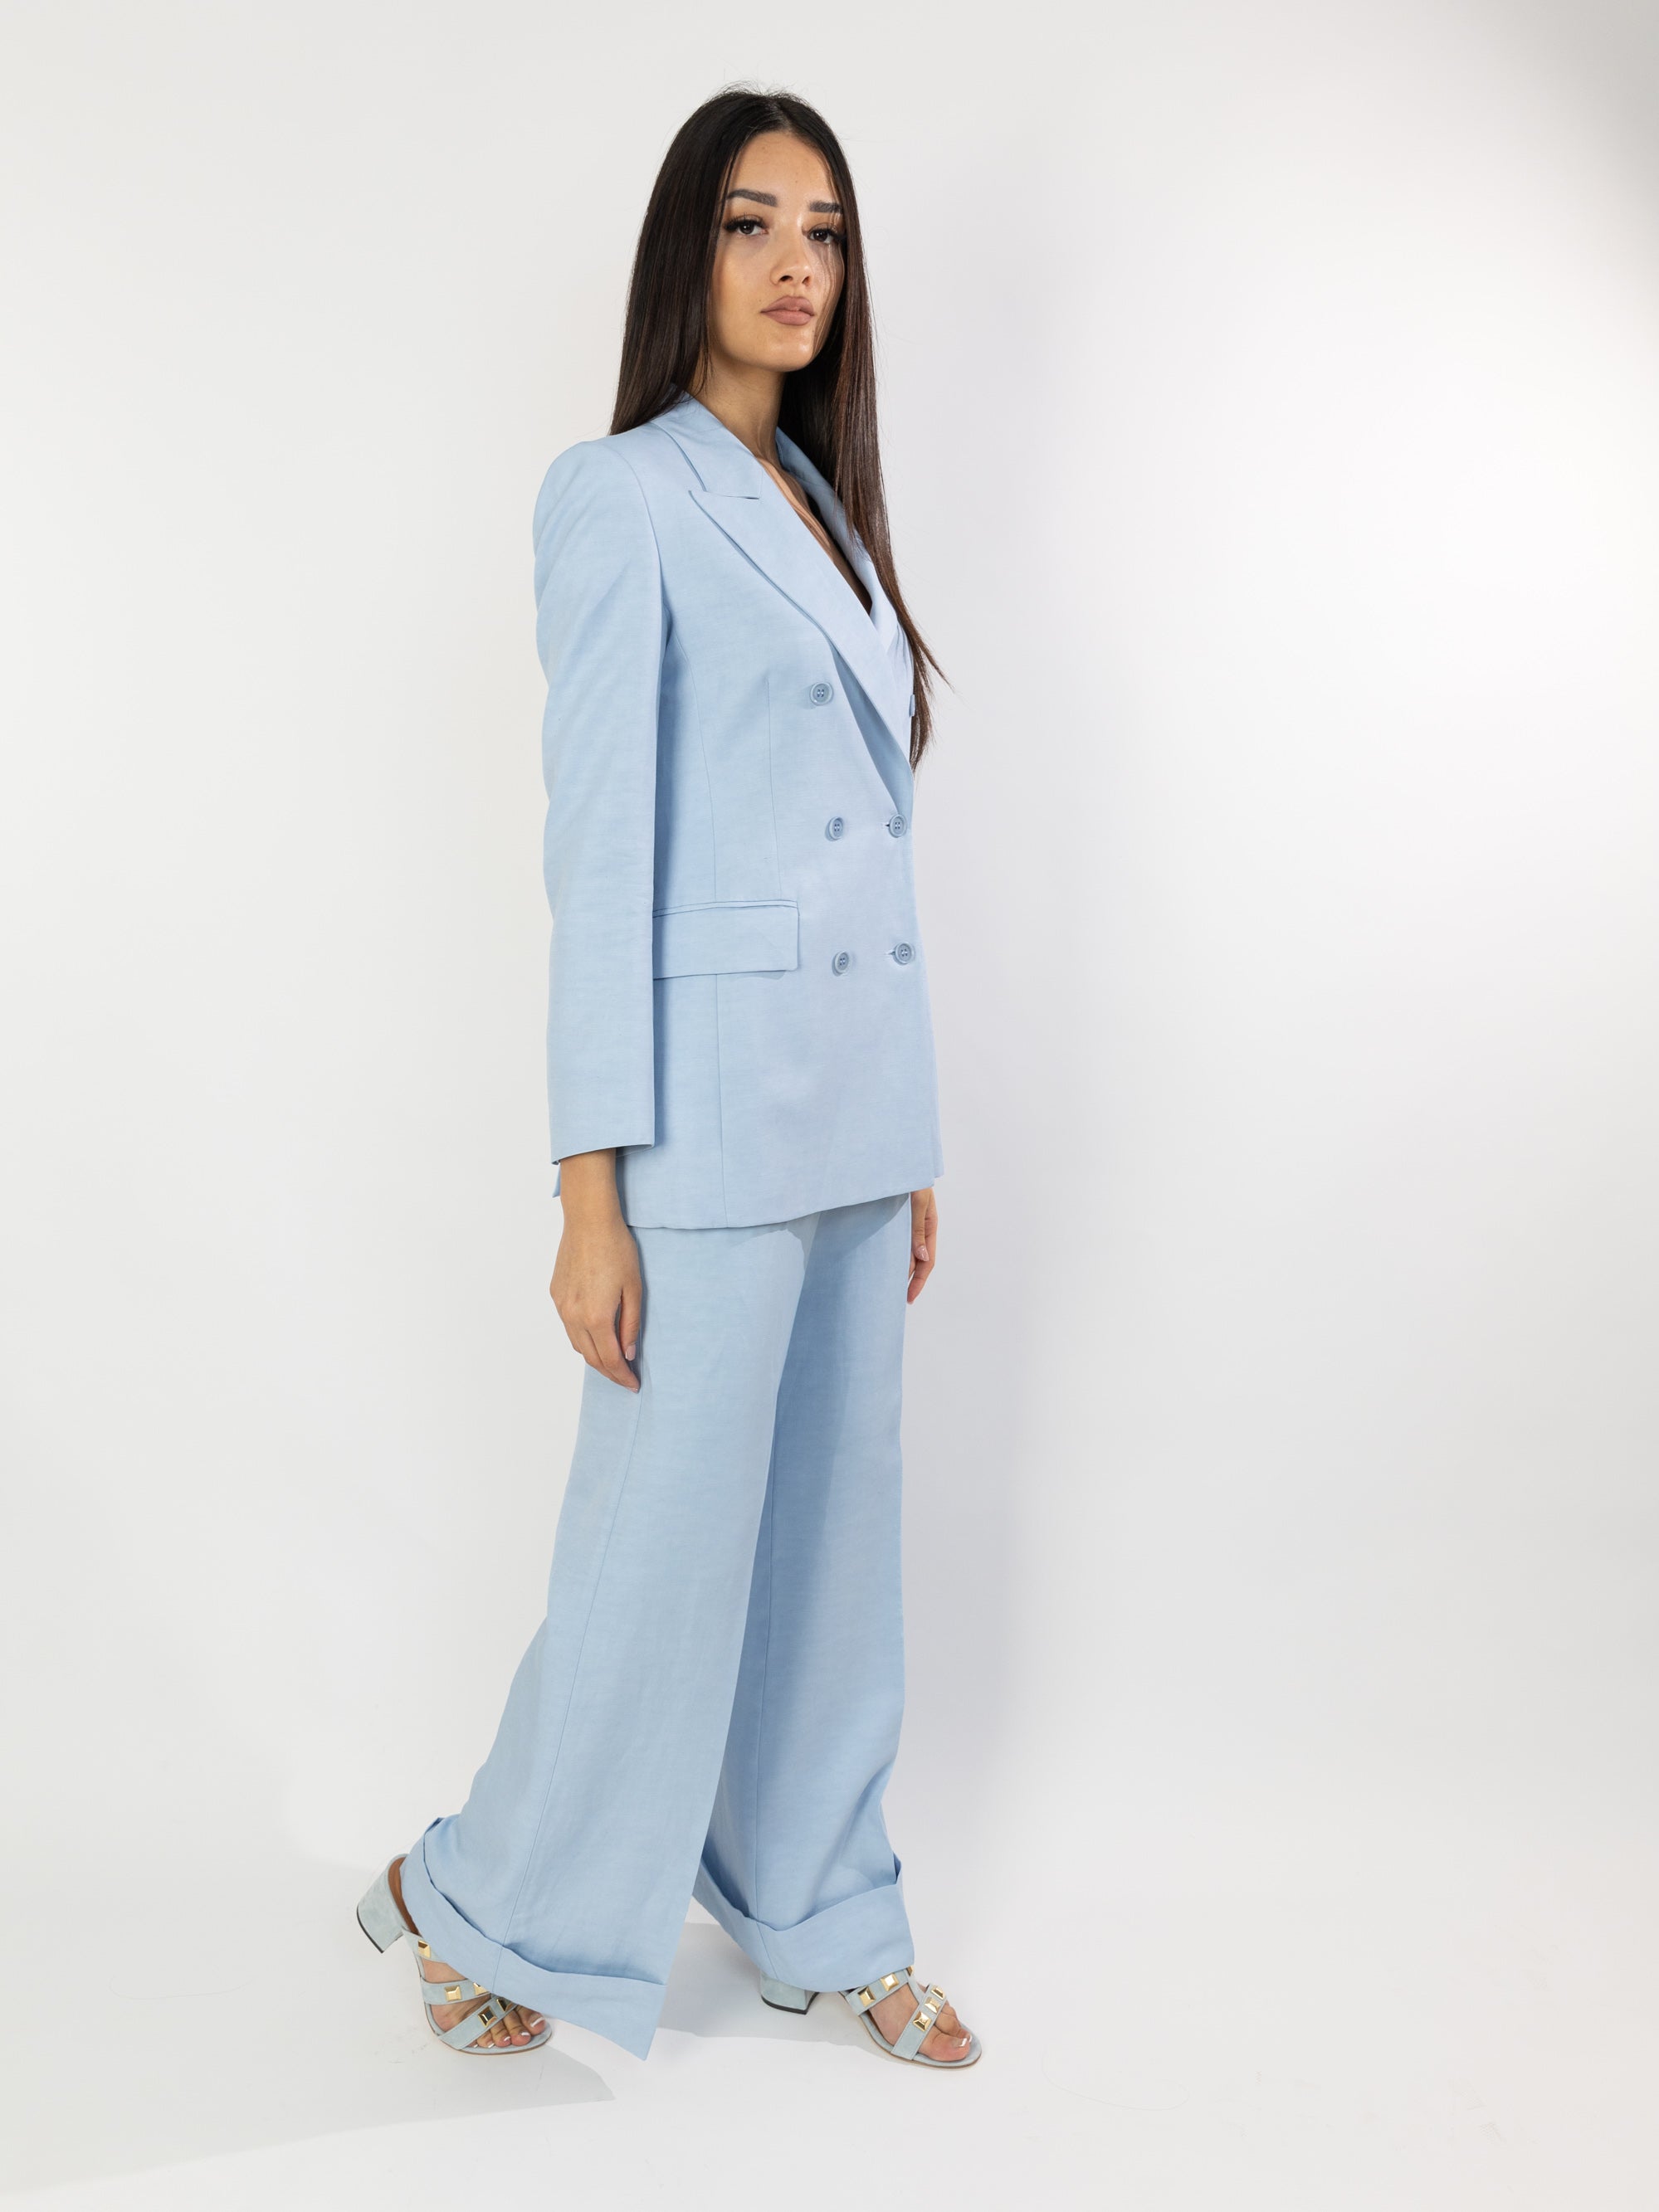 Palazzo Trousers in Linen with Powder Blue Cuff